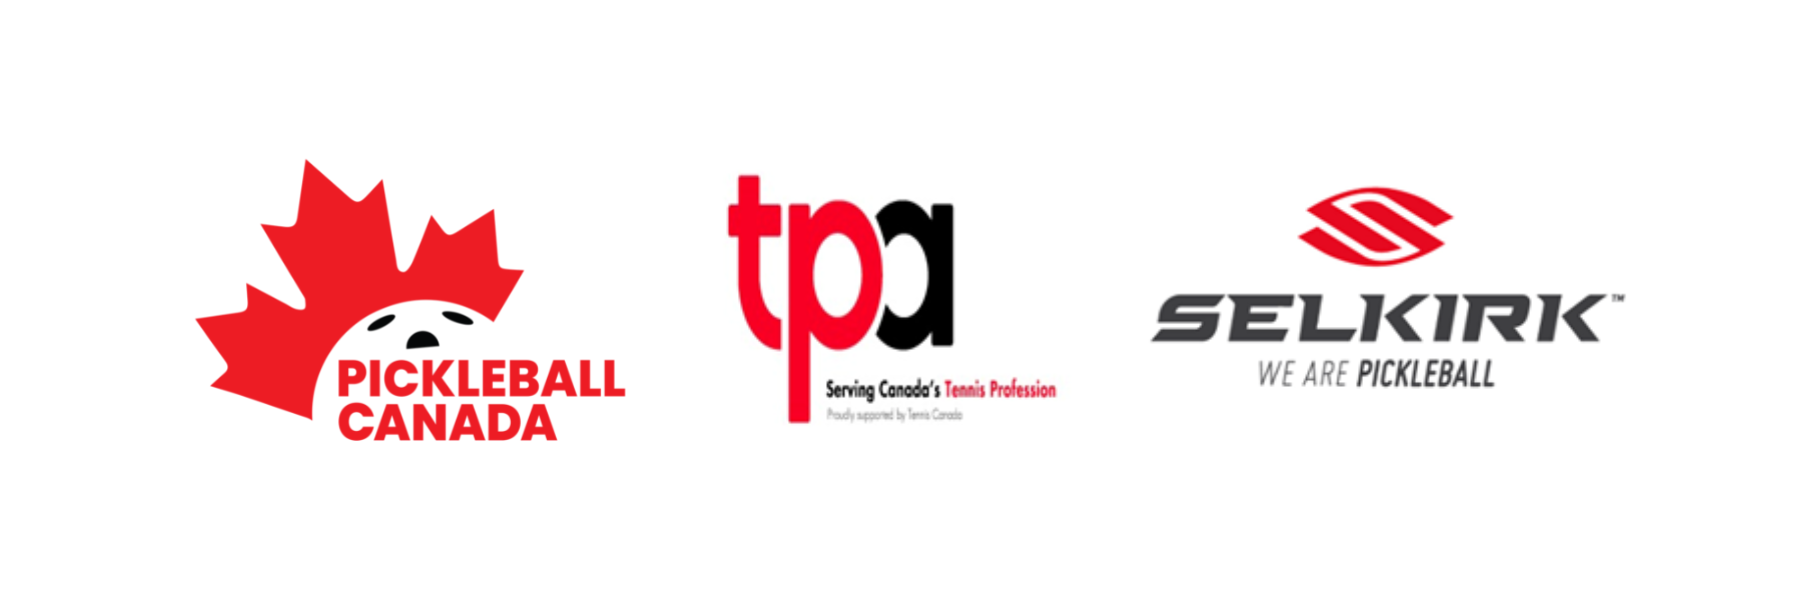 The Tennis Professionals Association and Pickleball Canada Announce the Pickleball  Coach Education Program Partnership with Selkirk Sport – Pickleball Canada